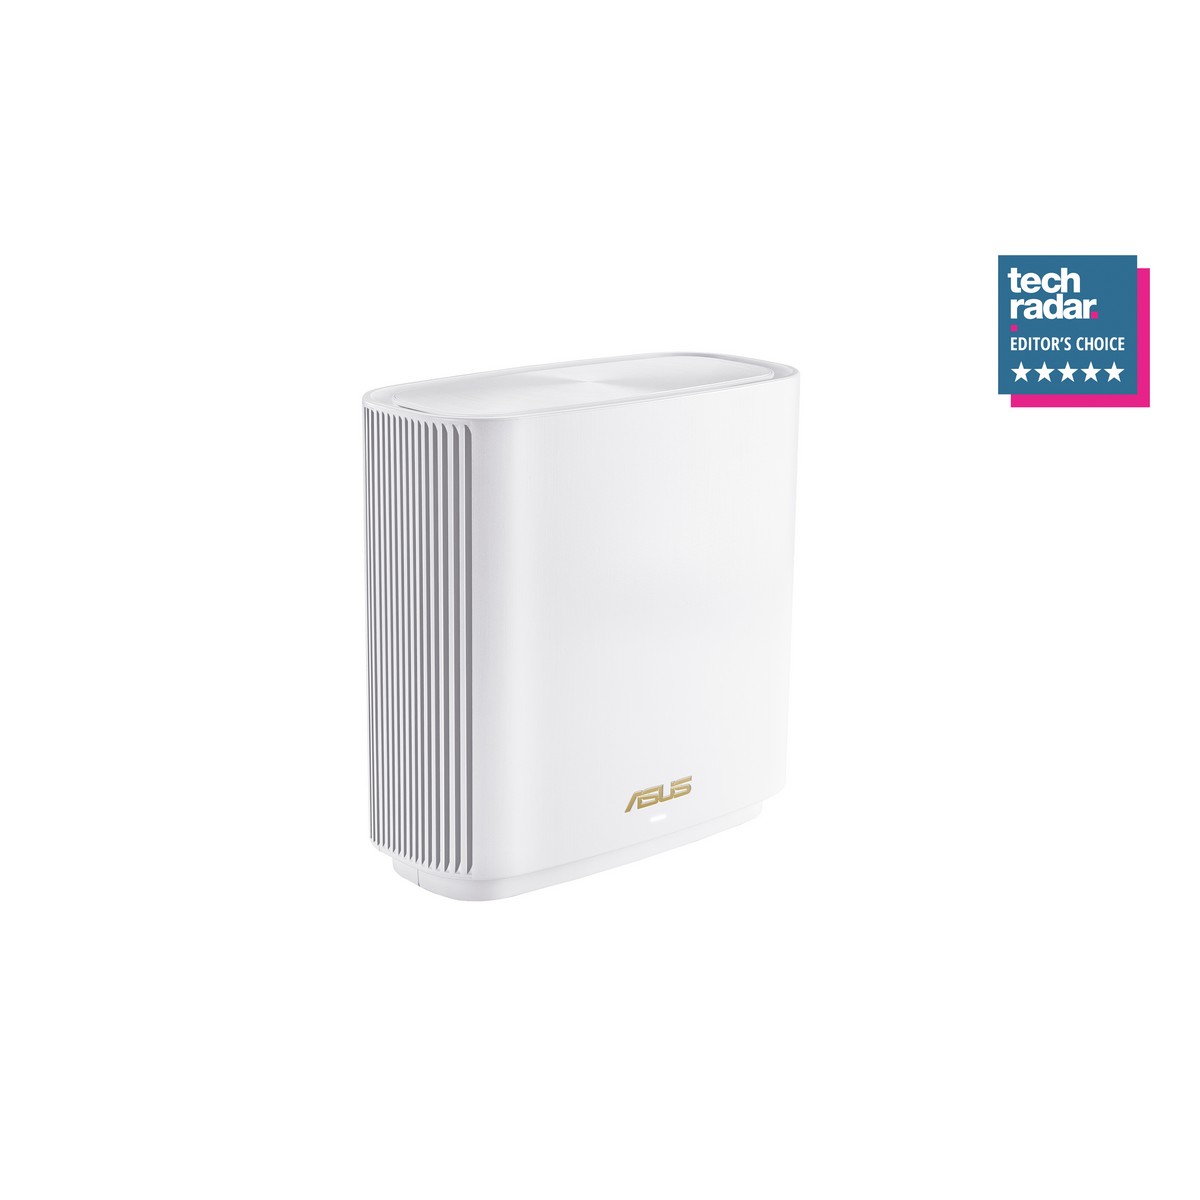 Asus - ASUS ZenWifi AX (XT8) AX6600 WiFi 6 Mesh System Pack of 1 - White